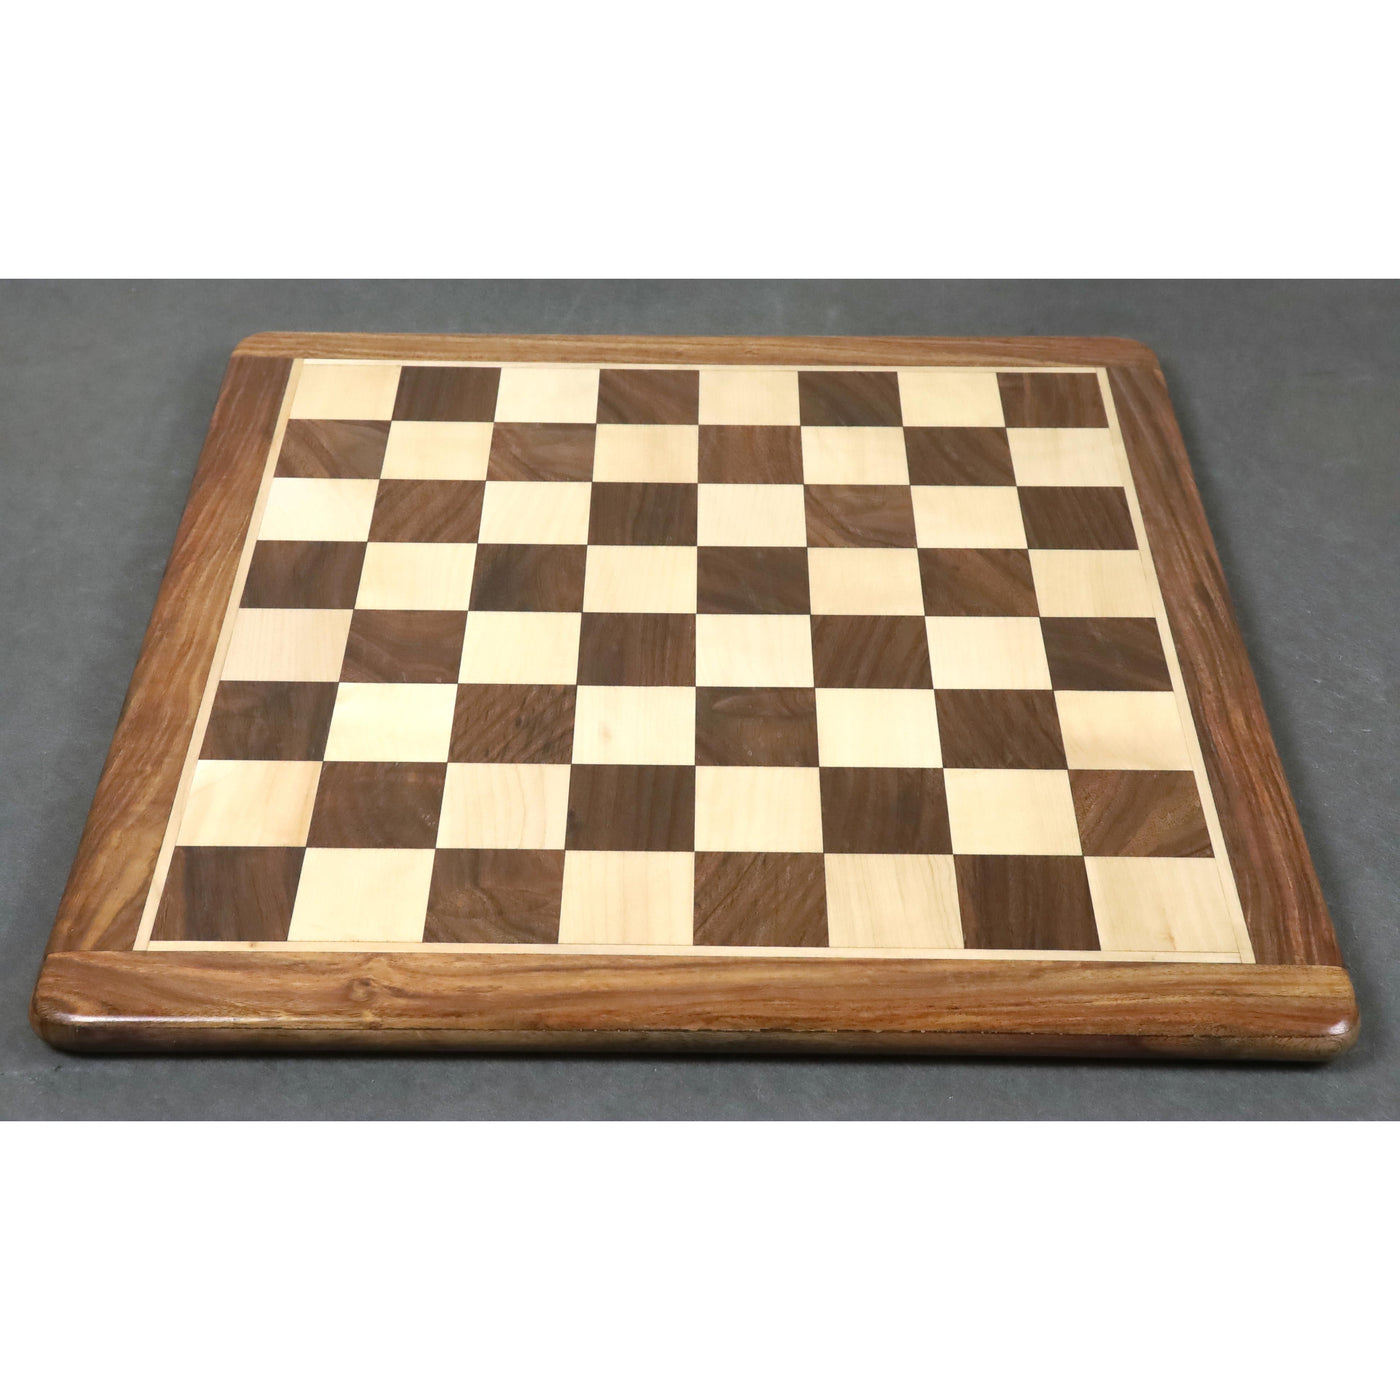 Chess board in Golden Rosewood & Maple Wood - 55 mm Square - Wooden Chess Pieces